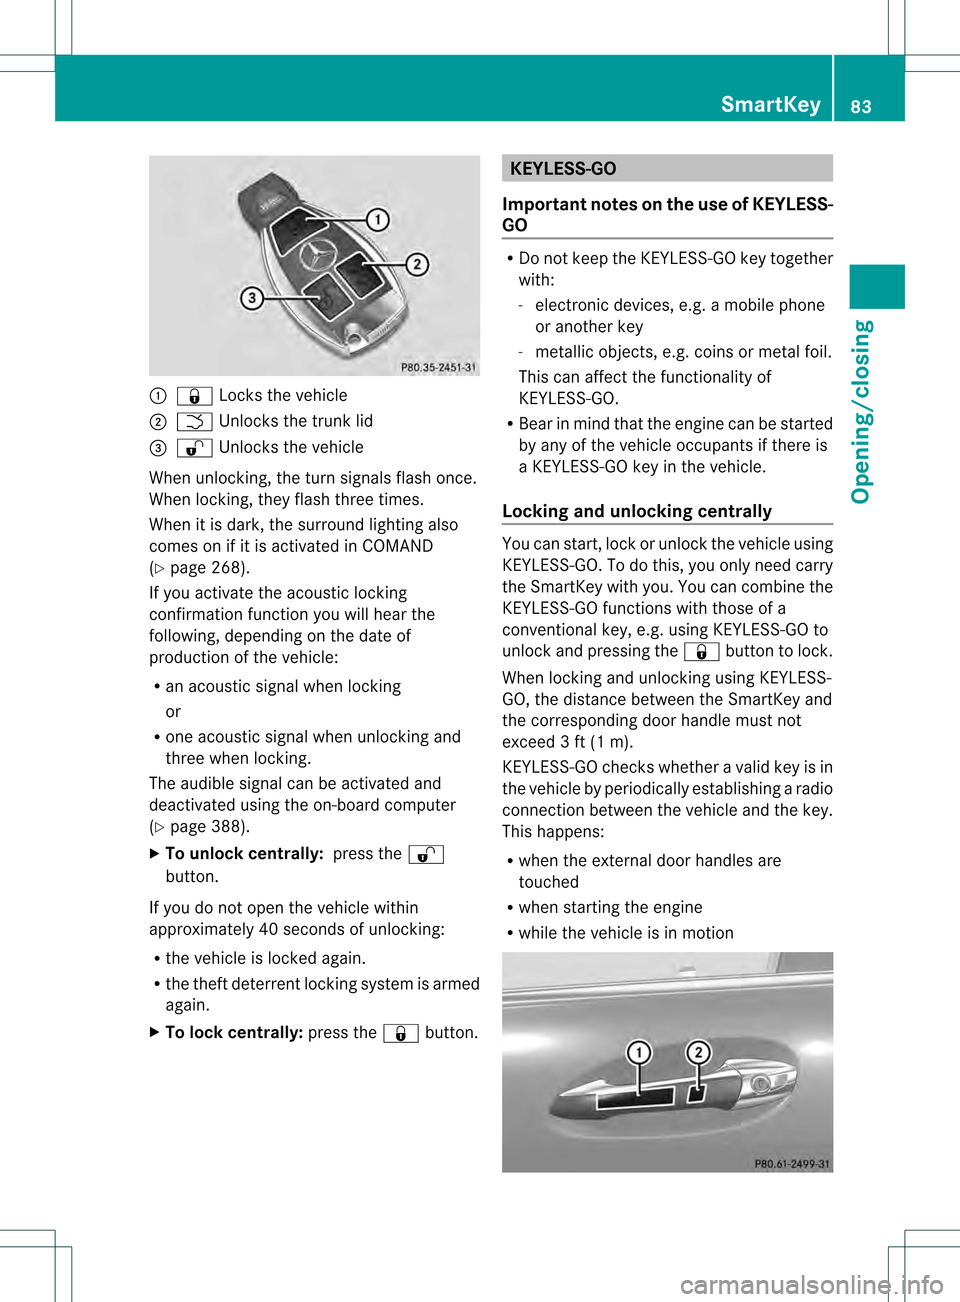 MERCEDES-BENZ S-Class 2013 W221 Owners Manual 0002
0009 Locks the vehicle
0003 0004 Unlocks the trunk lid
0026 000B Unlocks the vehicle
When unlocking, the turn signals flash once.
When locking, they flash three times.
When it is dark, the surrou